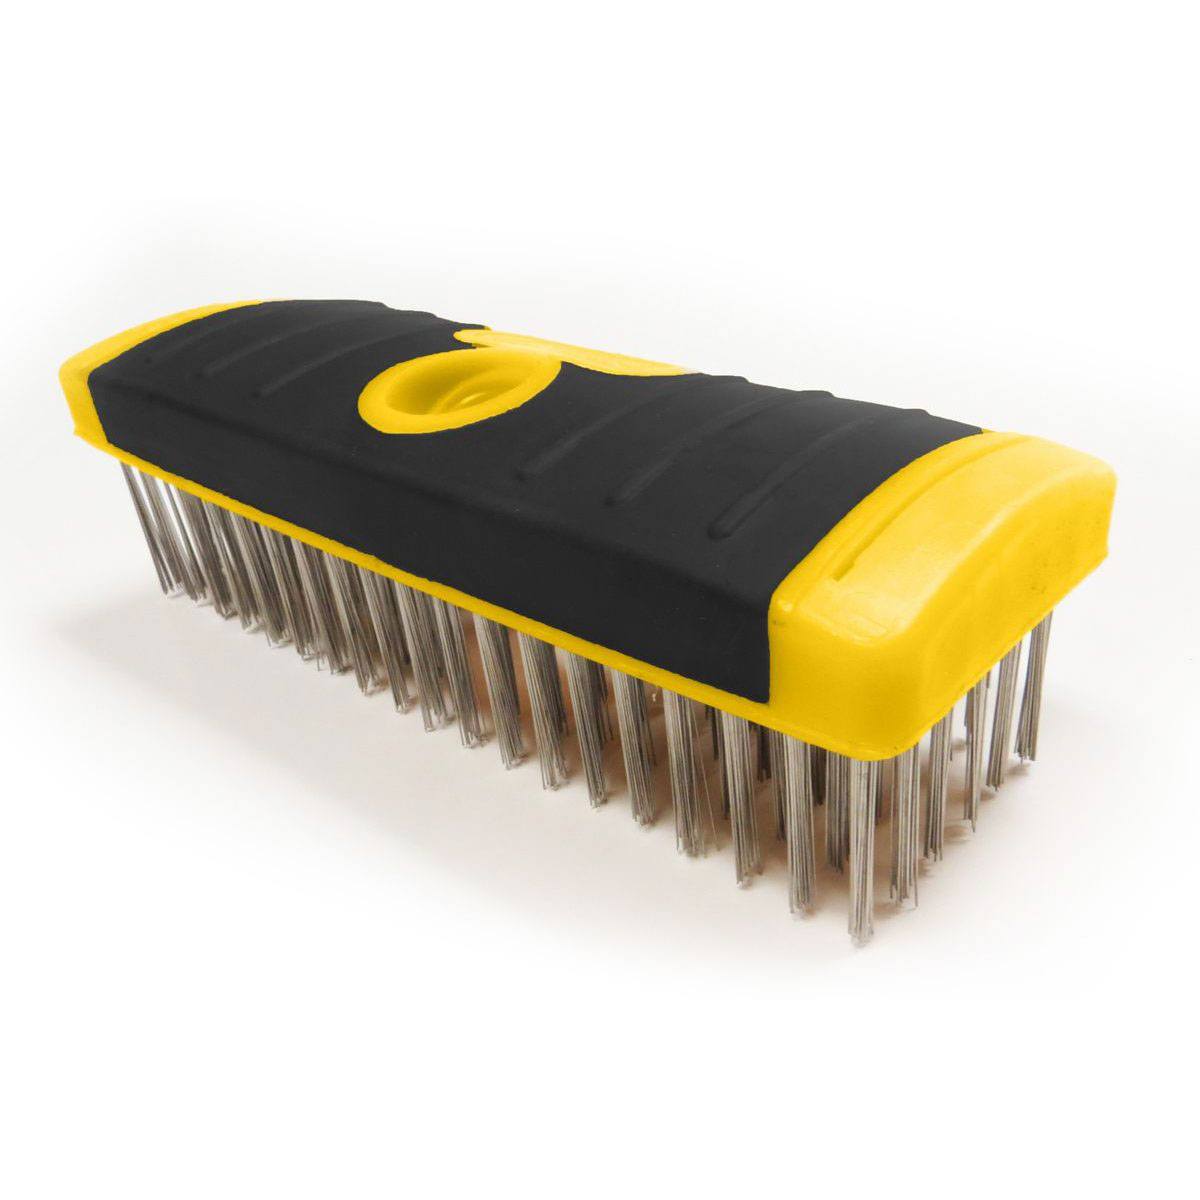 SB619/SS) 6 x19 SG Stainless Wire Brush-Scrub Brush Block, Labelled »  ALLWAY® The Tools You Ask For By Name